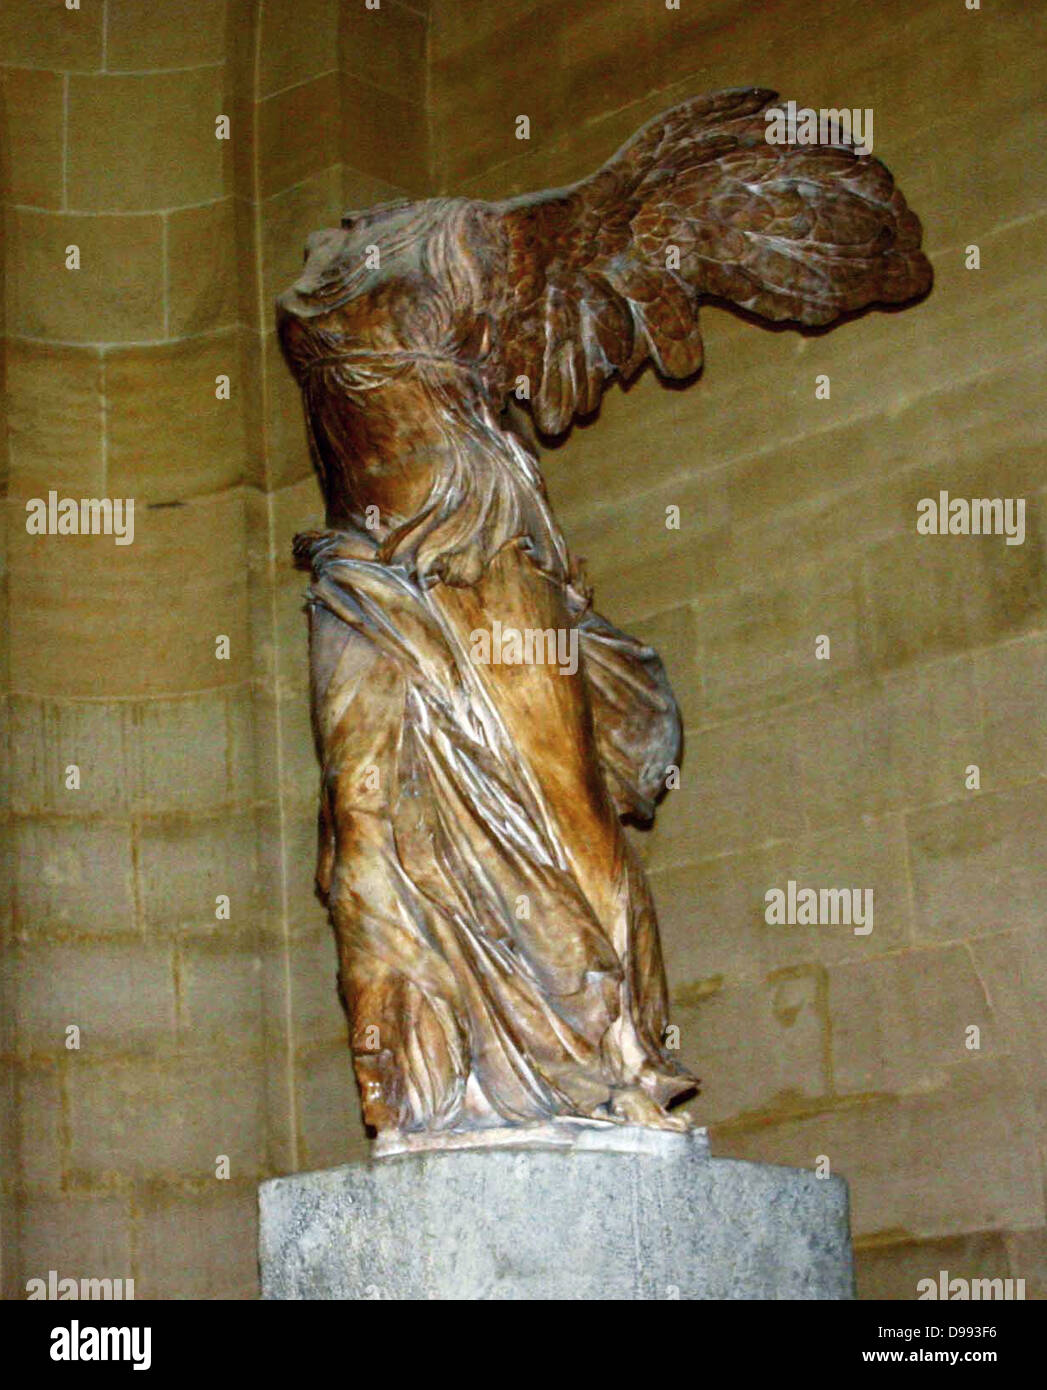 The Winged Victory of Samothrace, also called the Nike of Samothrace is a second century B.C. marble sculpture of the Greek goddess Nike (Victory). Since 1884, it has been prominently displayed at the Louvre and is one of the most celebrated sculptures in Stock Photo